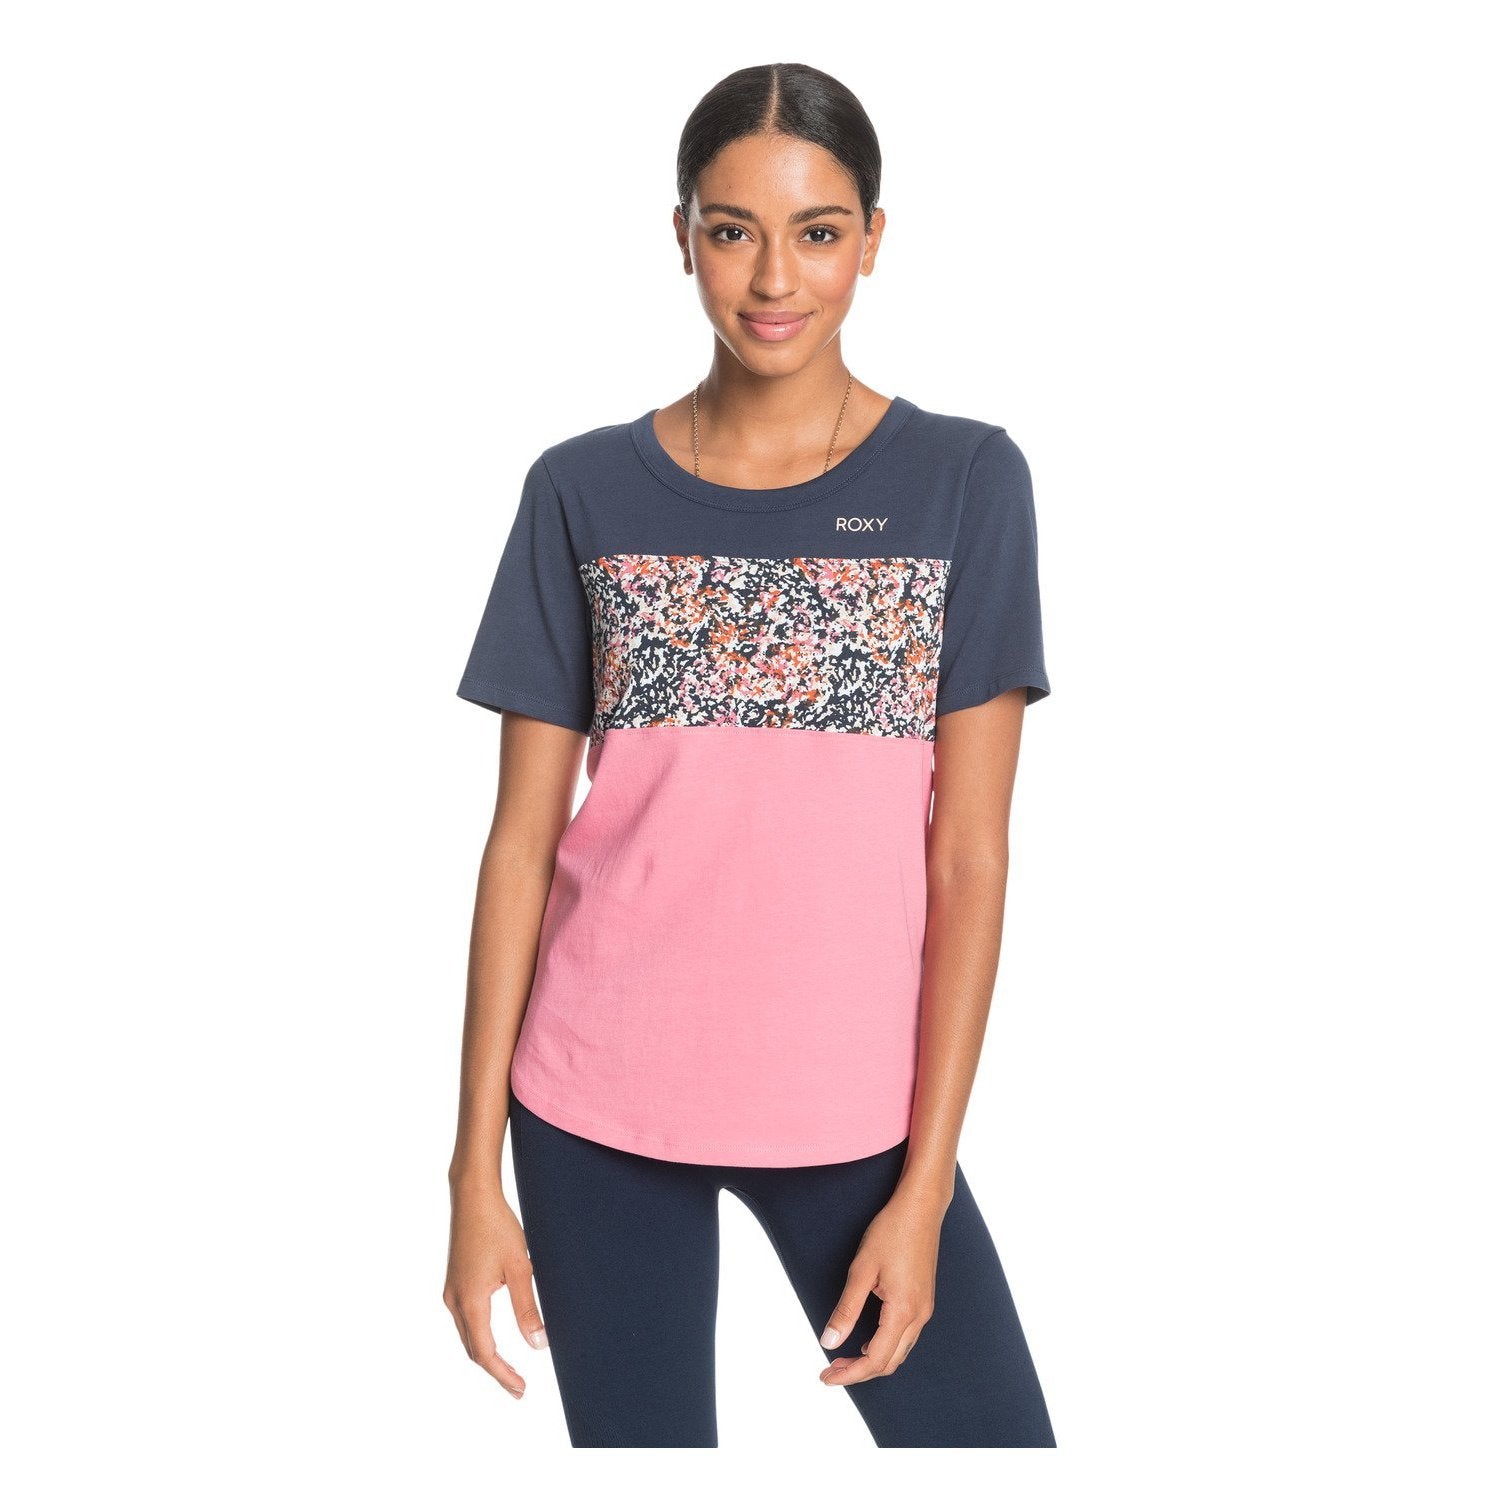 Rodeo Drive Party - Sports Top for Women - Sporty Pro